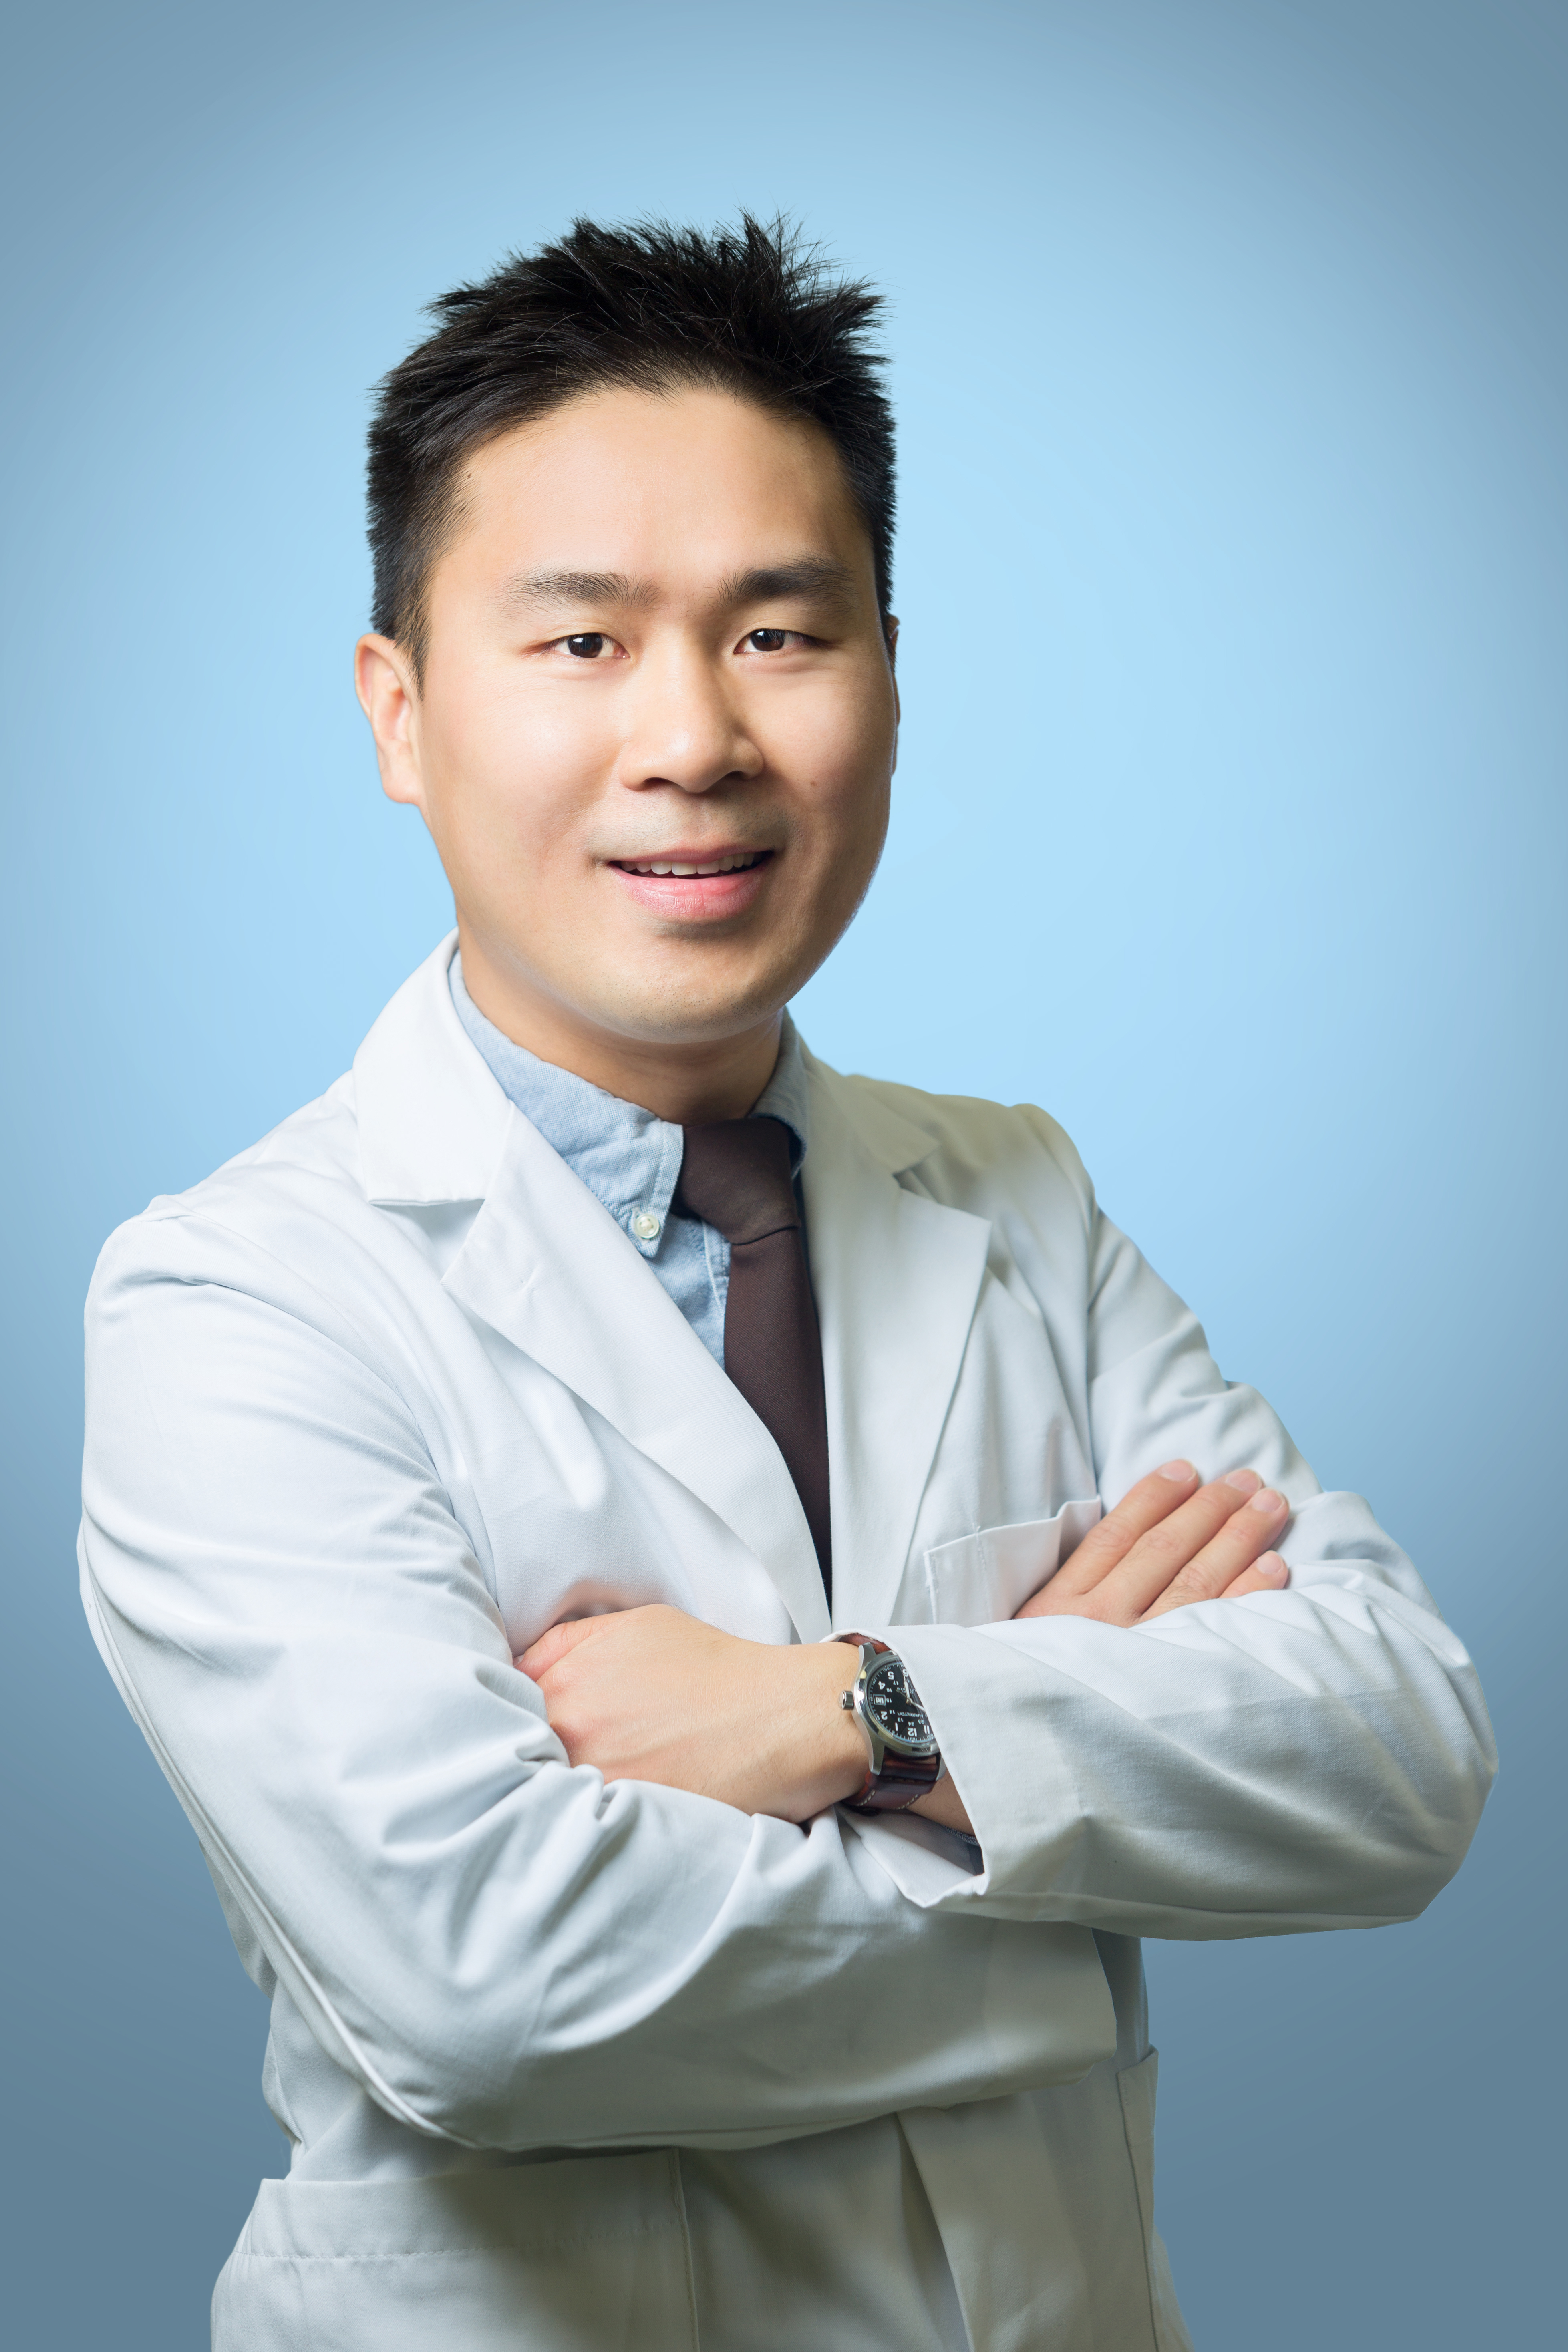 DR. WING S. YEUNG